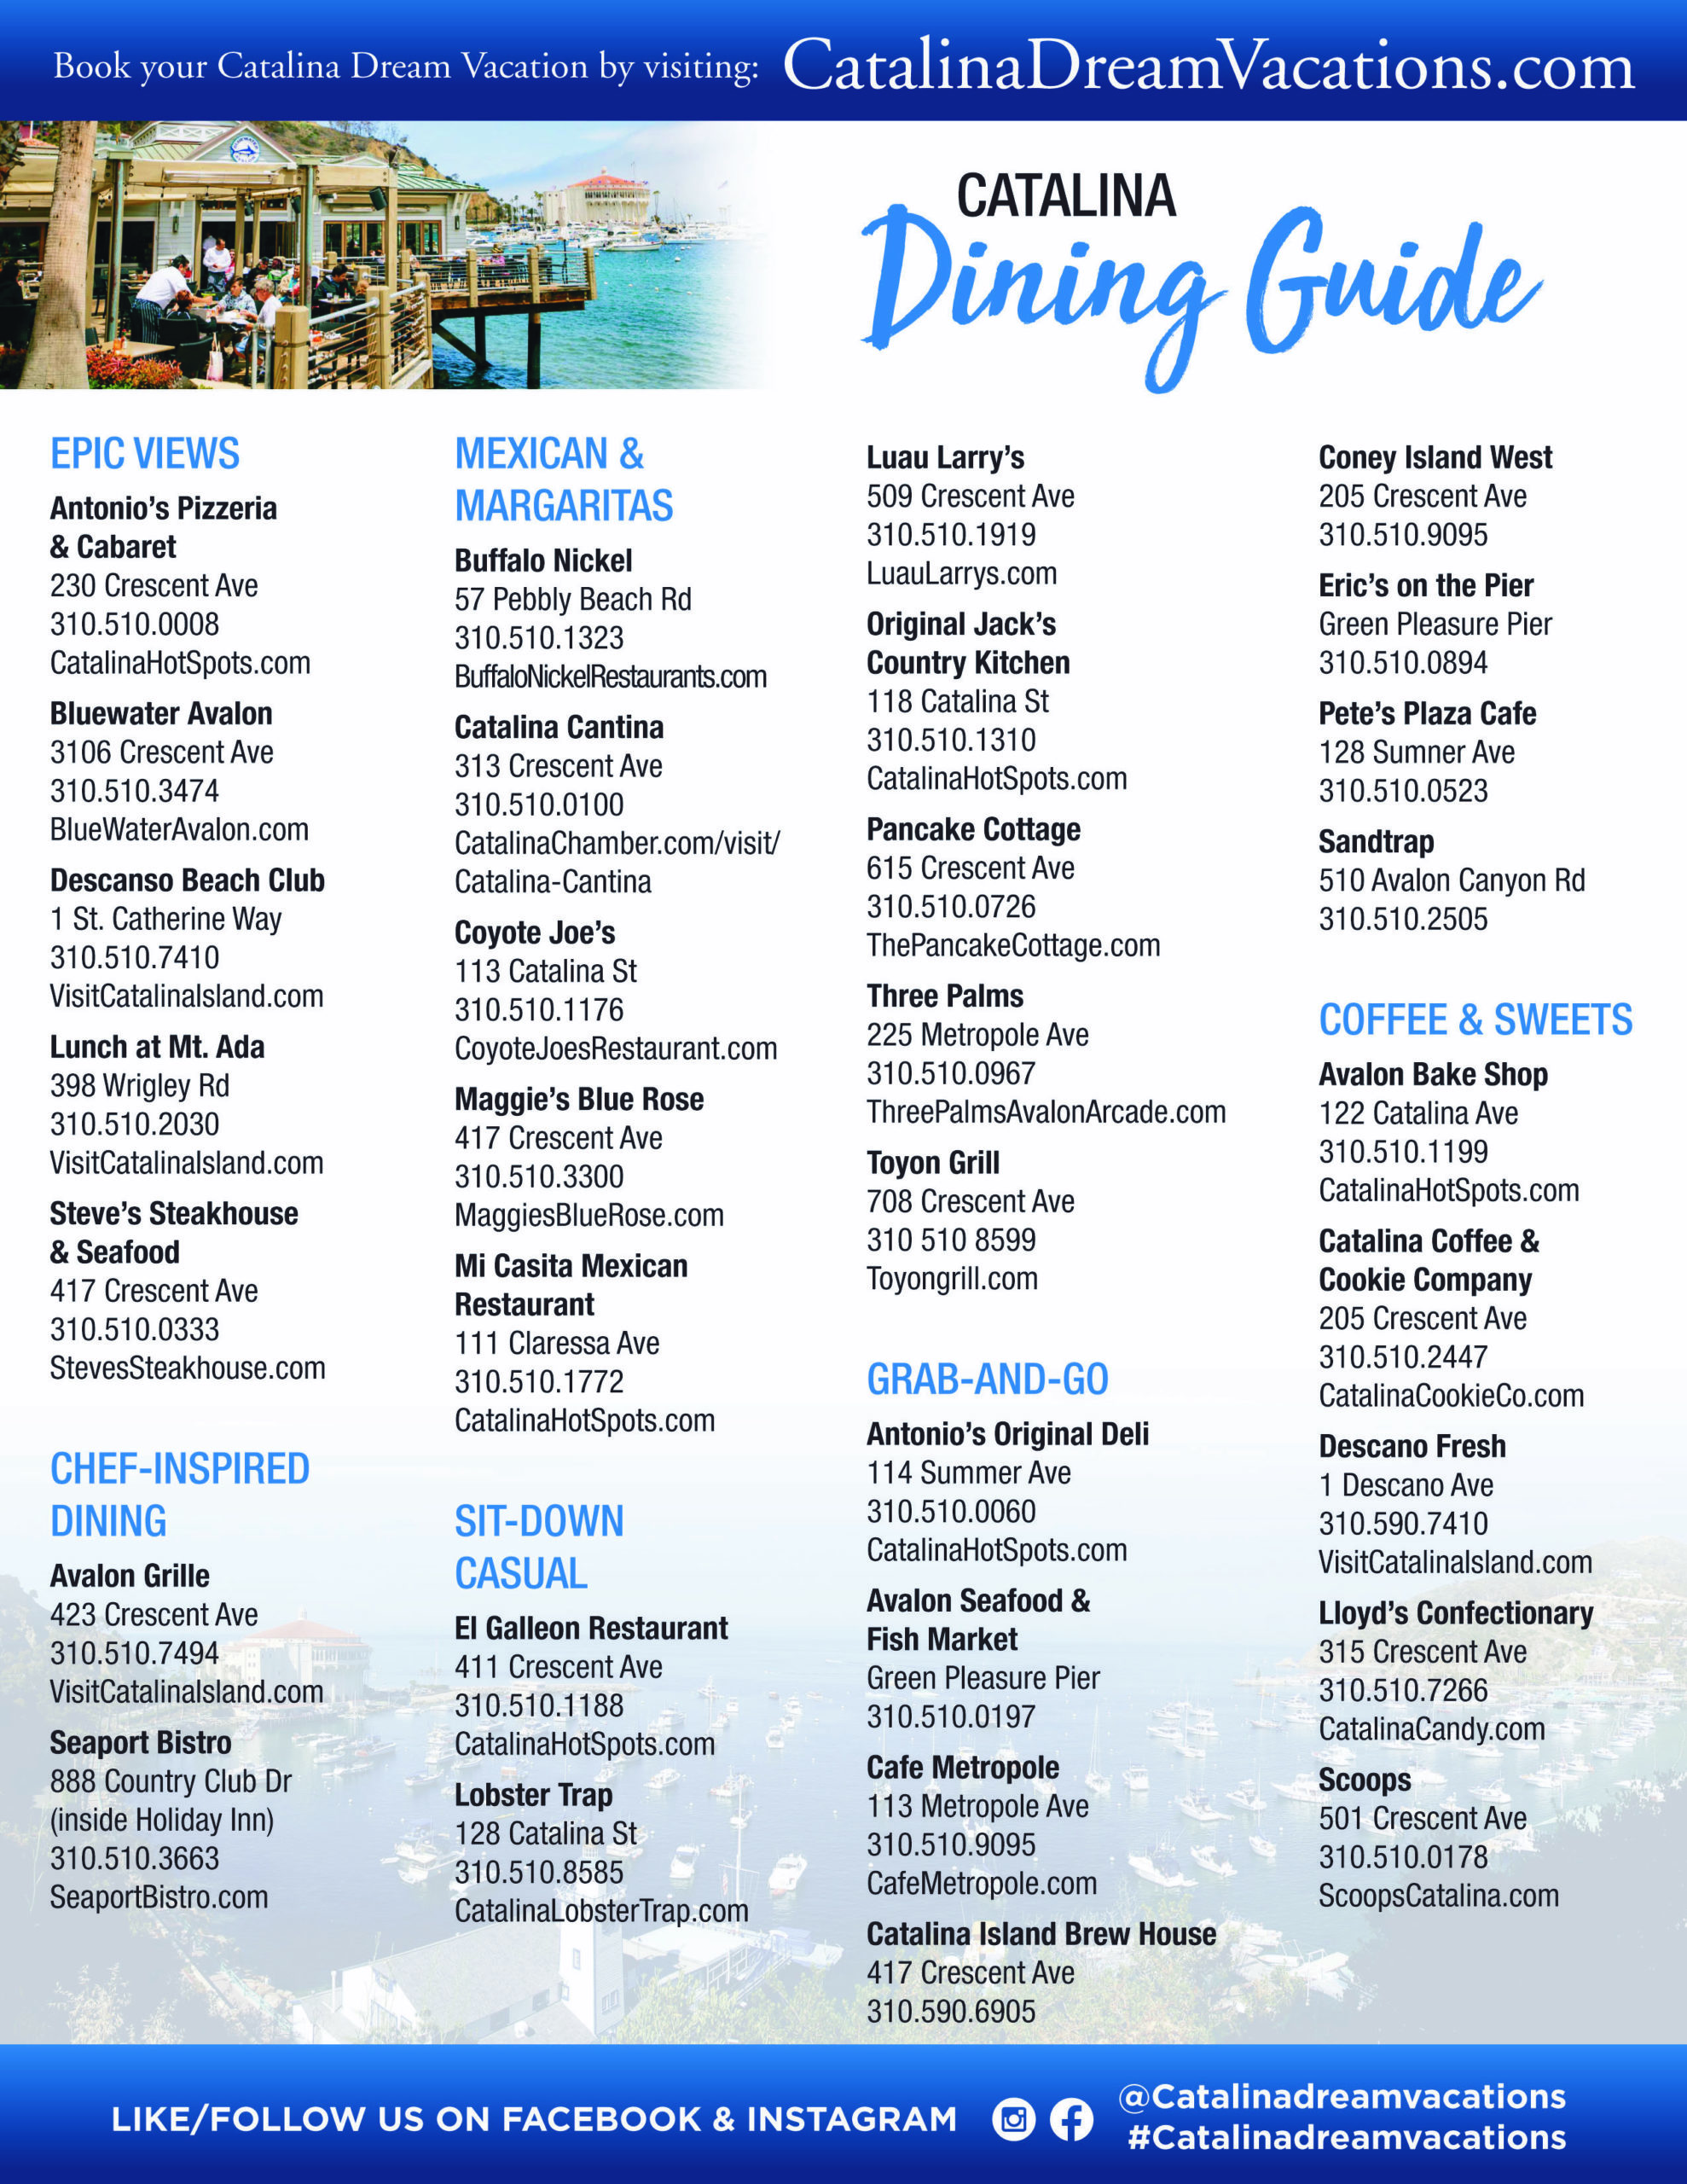 Catalina Island dining guide